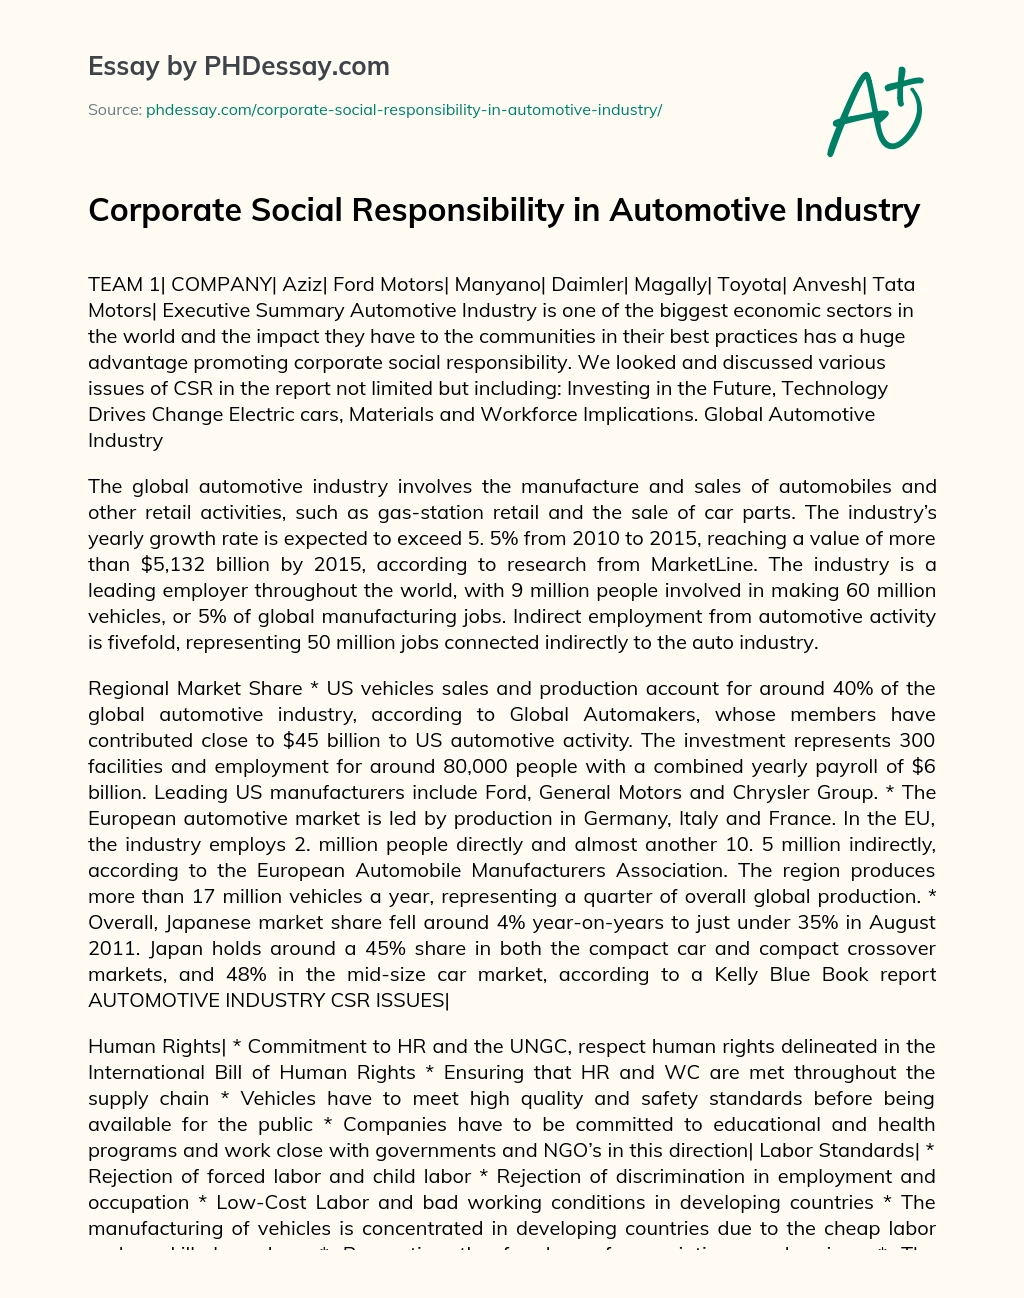 Corporate Social Responsibility in Automotive Industry essay